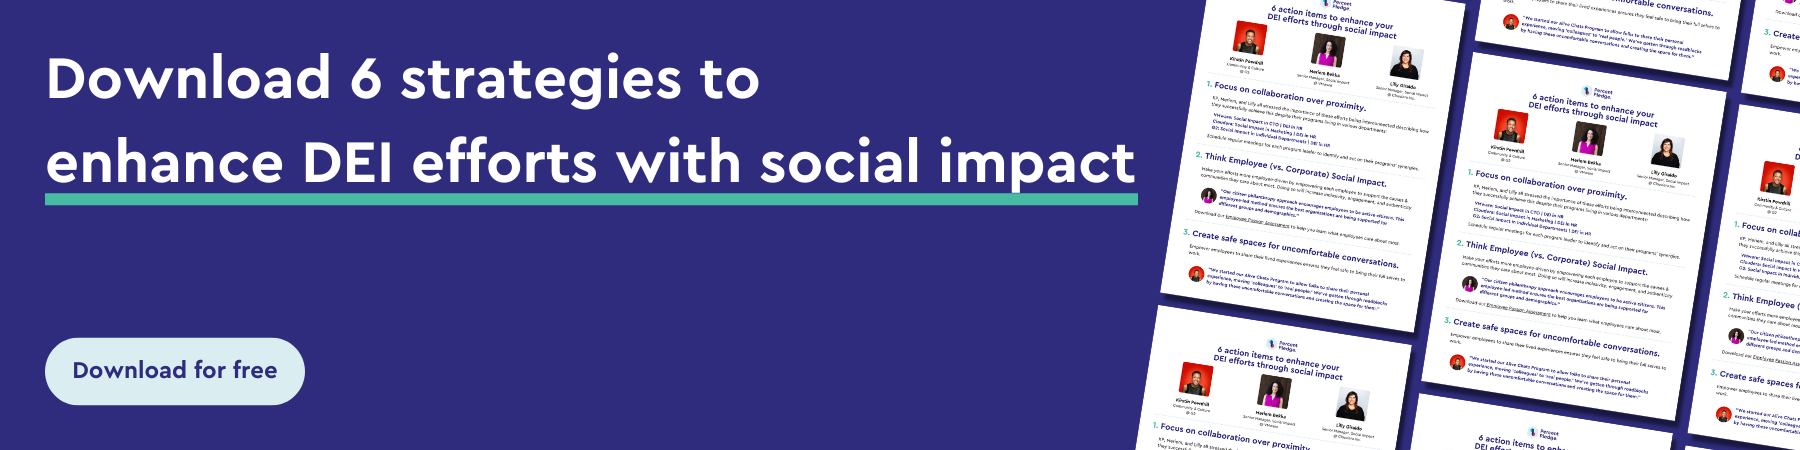 6 strategies to enhance DEI efforts with social impact